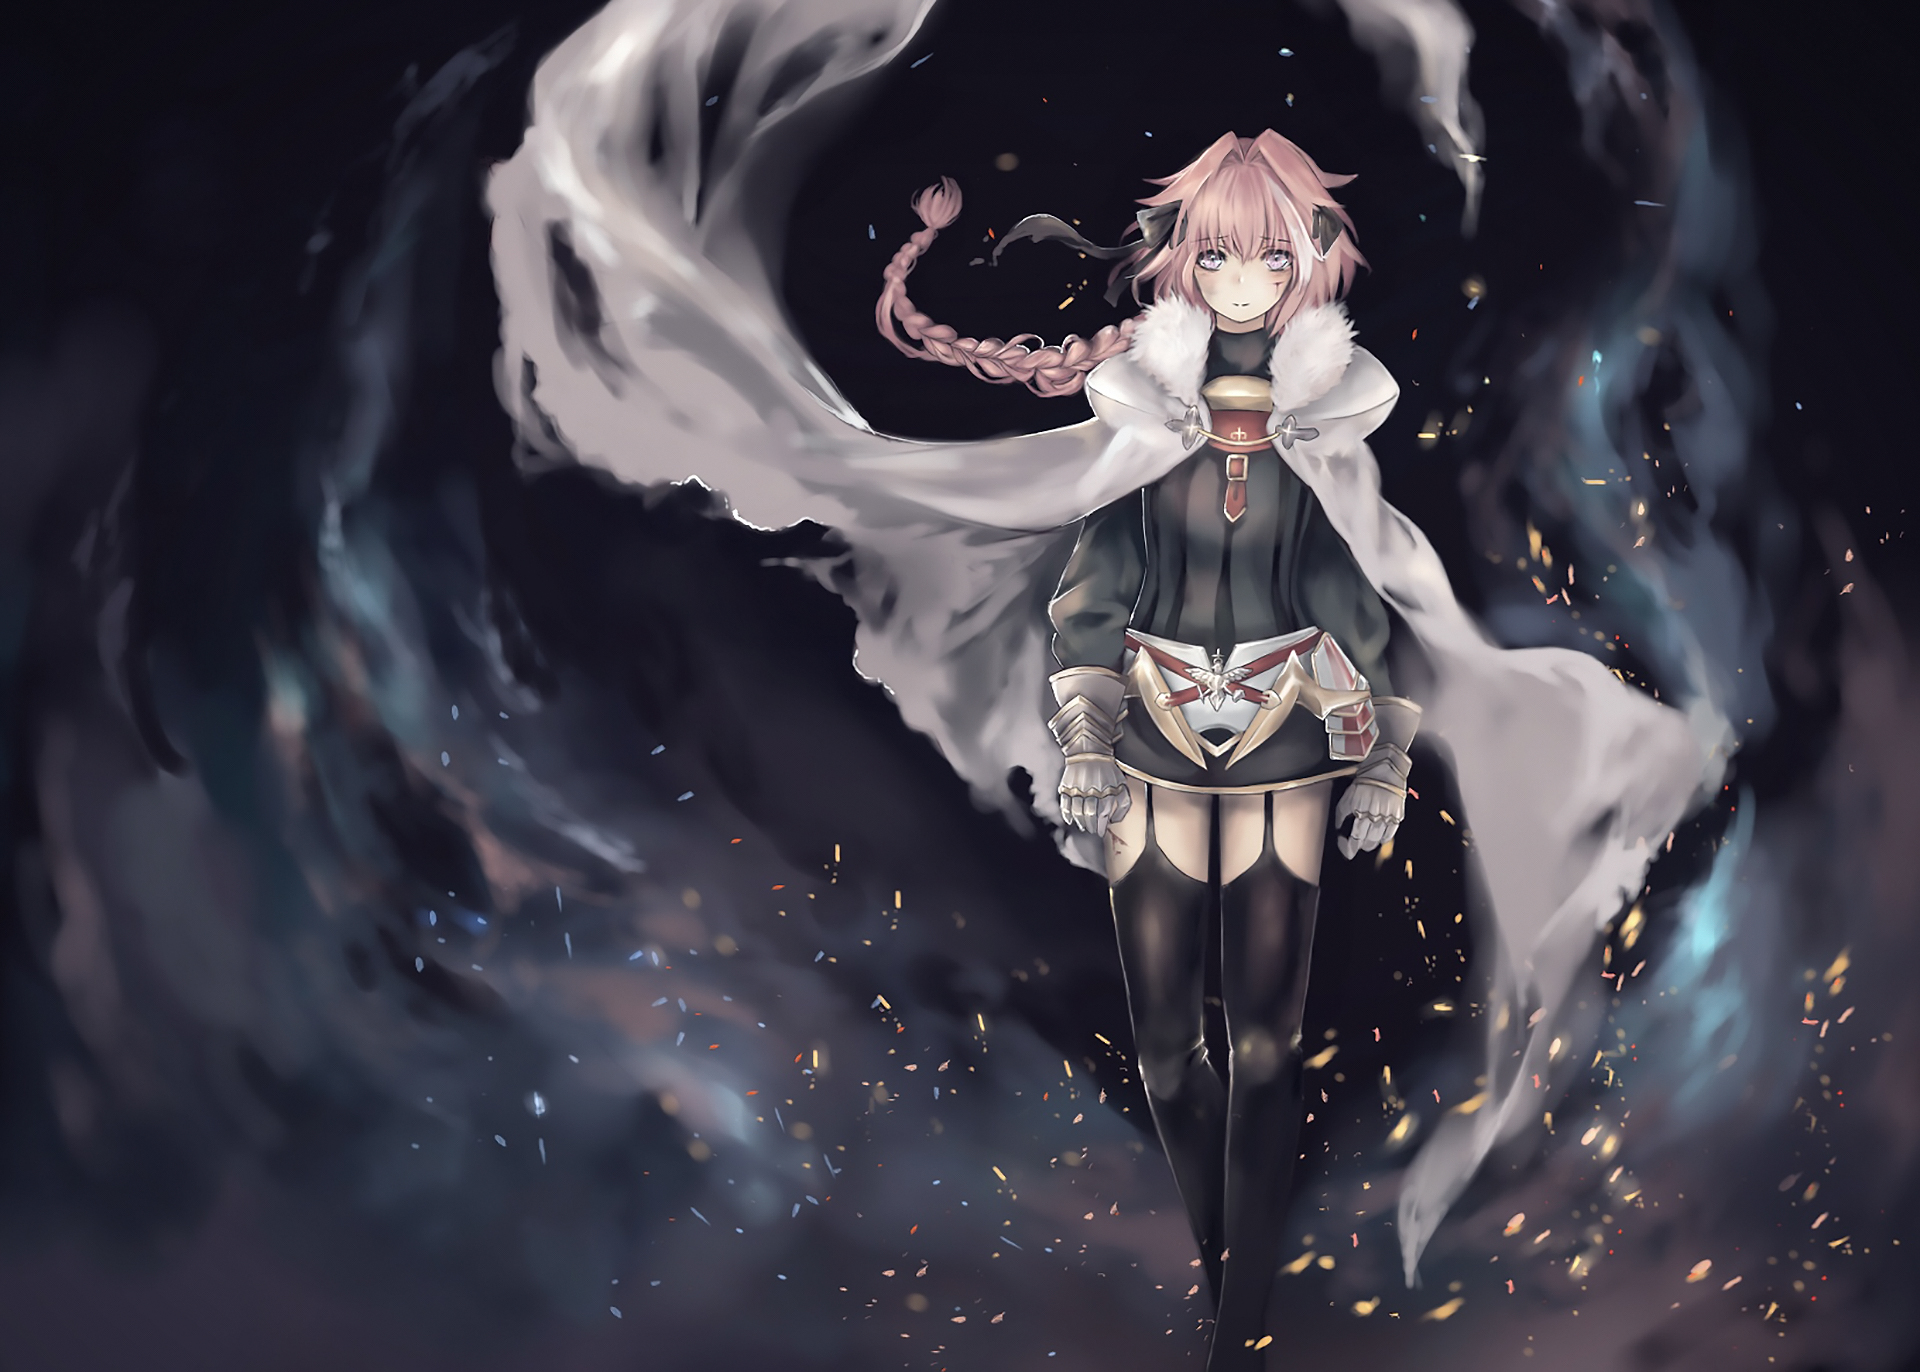 Desktop Wallpaper Astolfo, Fate/Apocrypha, Fate Series, Anime Girl, Hd  Image, Picture, Background, 94f196